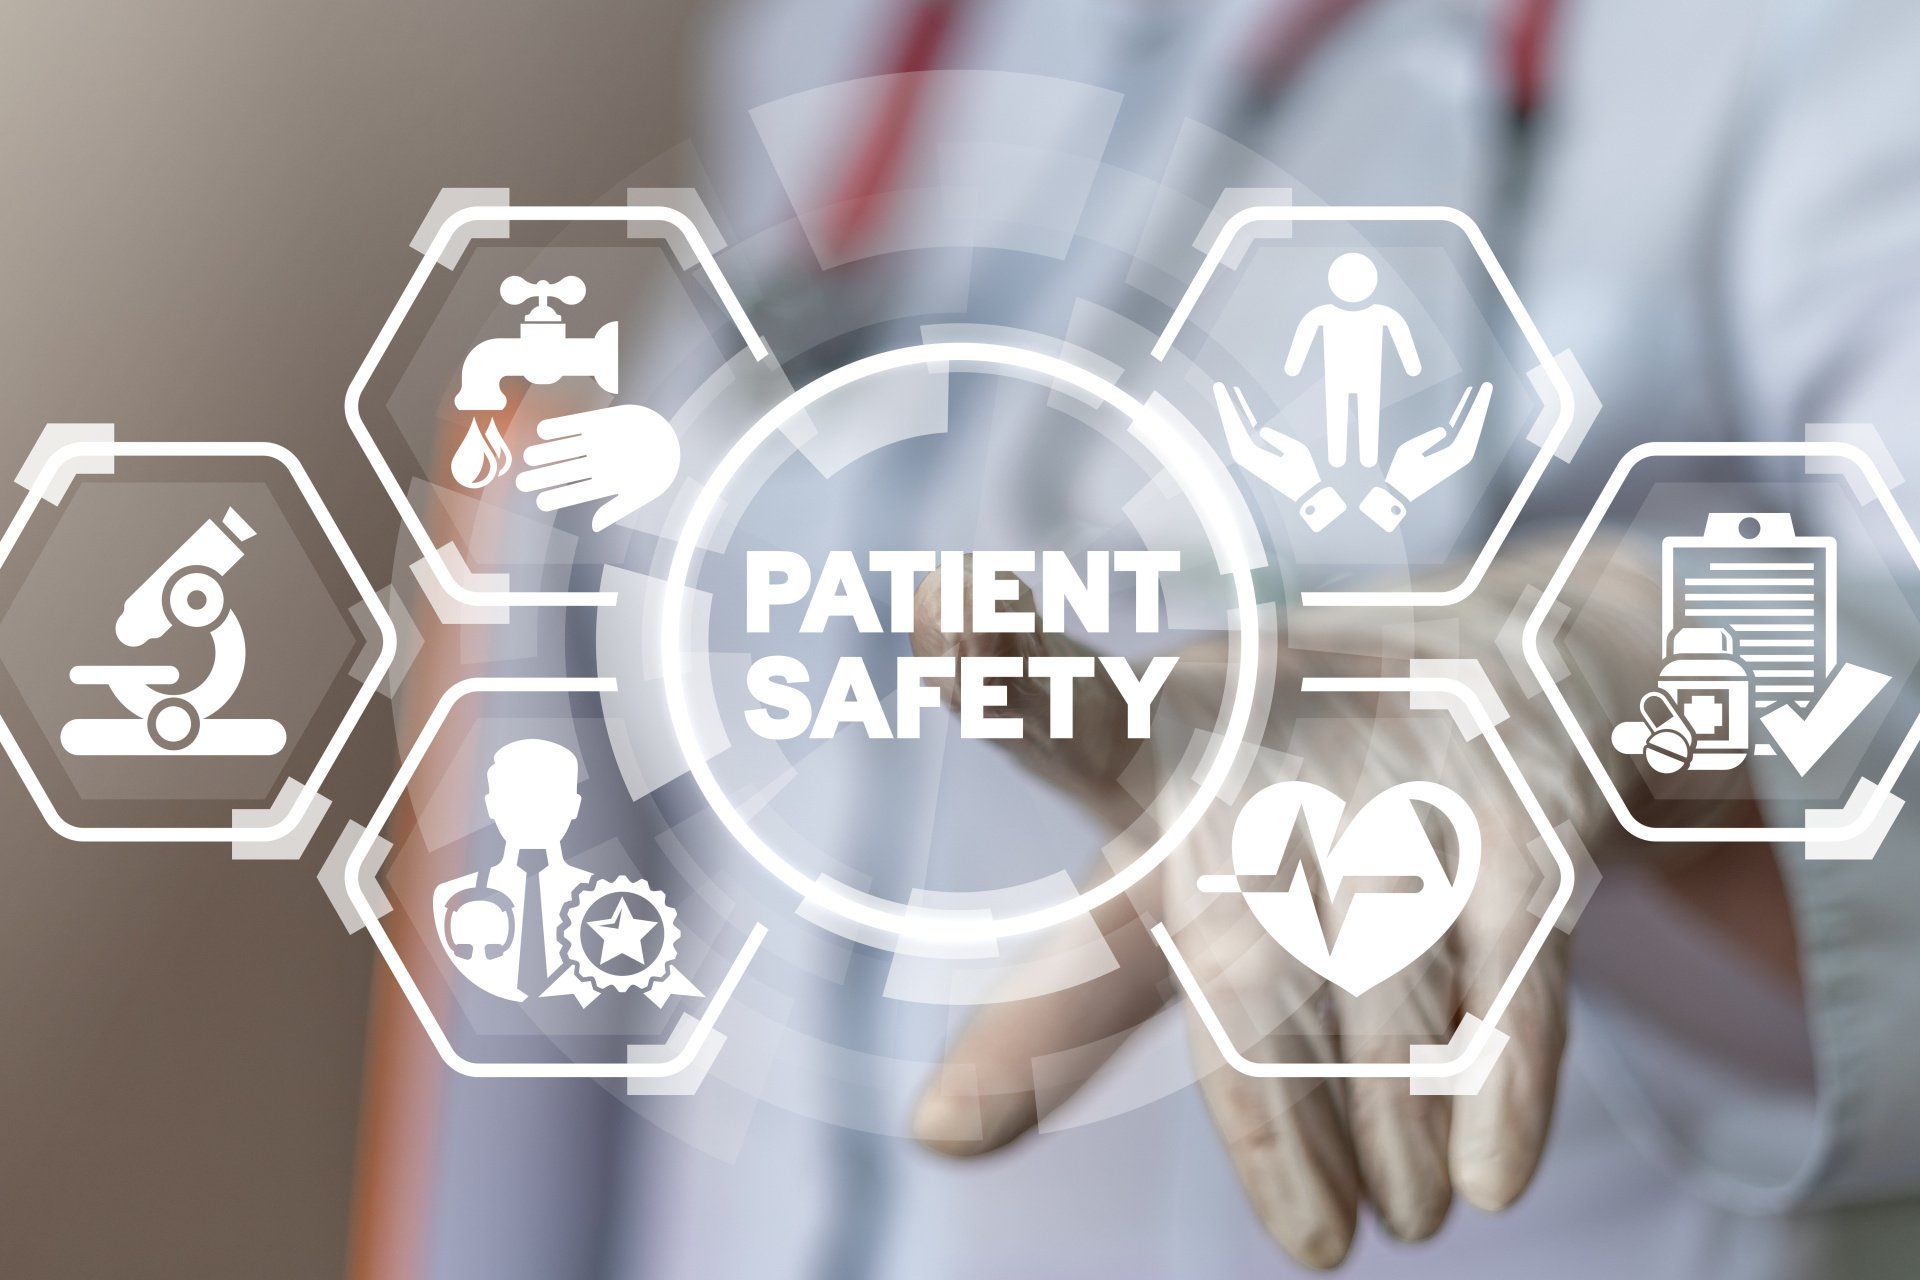 How can health & social care create a culture of patient safety